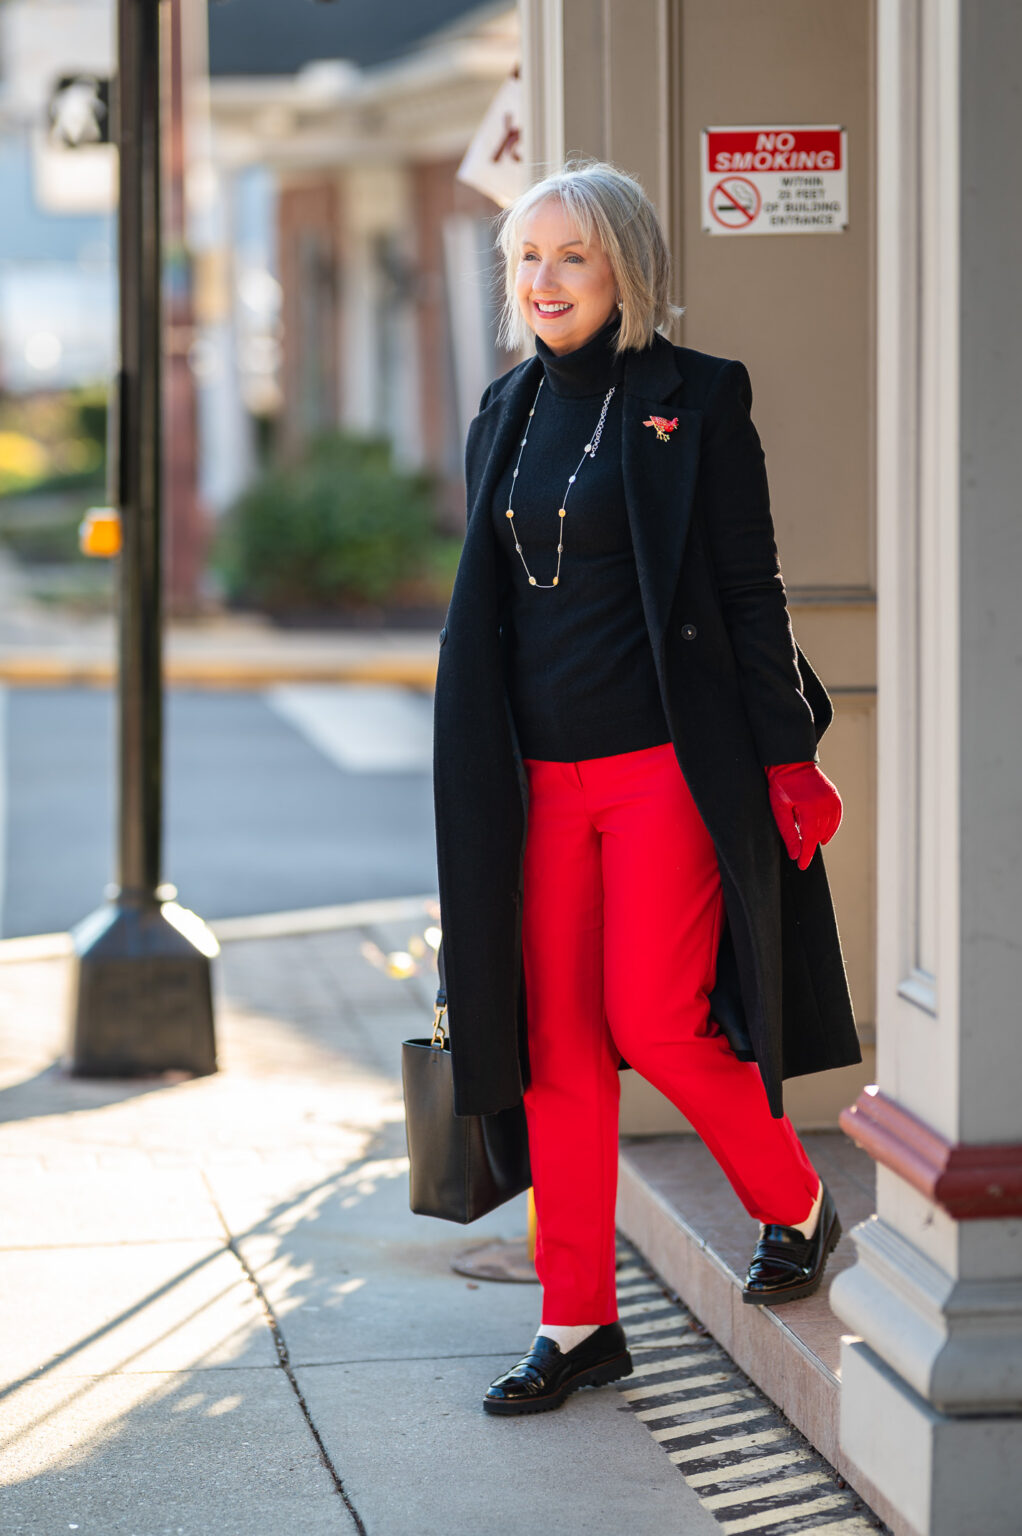 One Winter Outfit from Daytime to Festive - Dressed for My Day